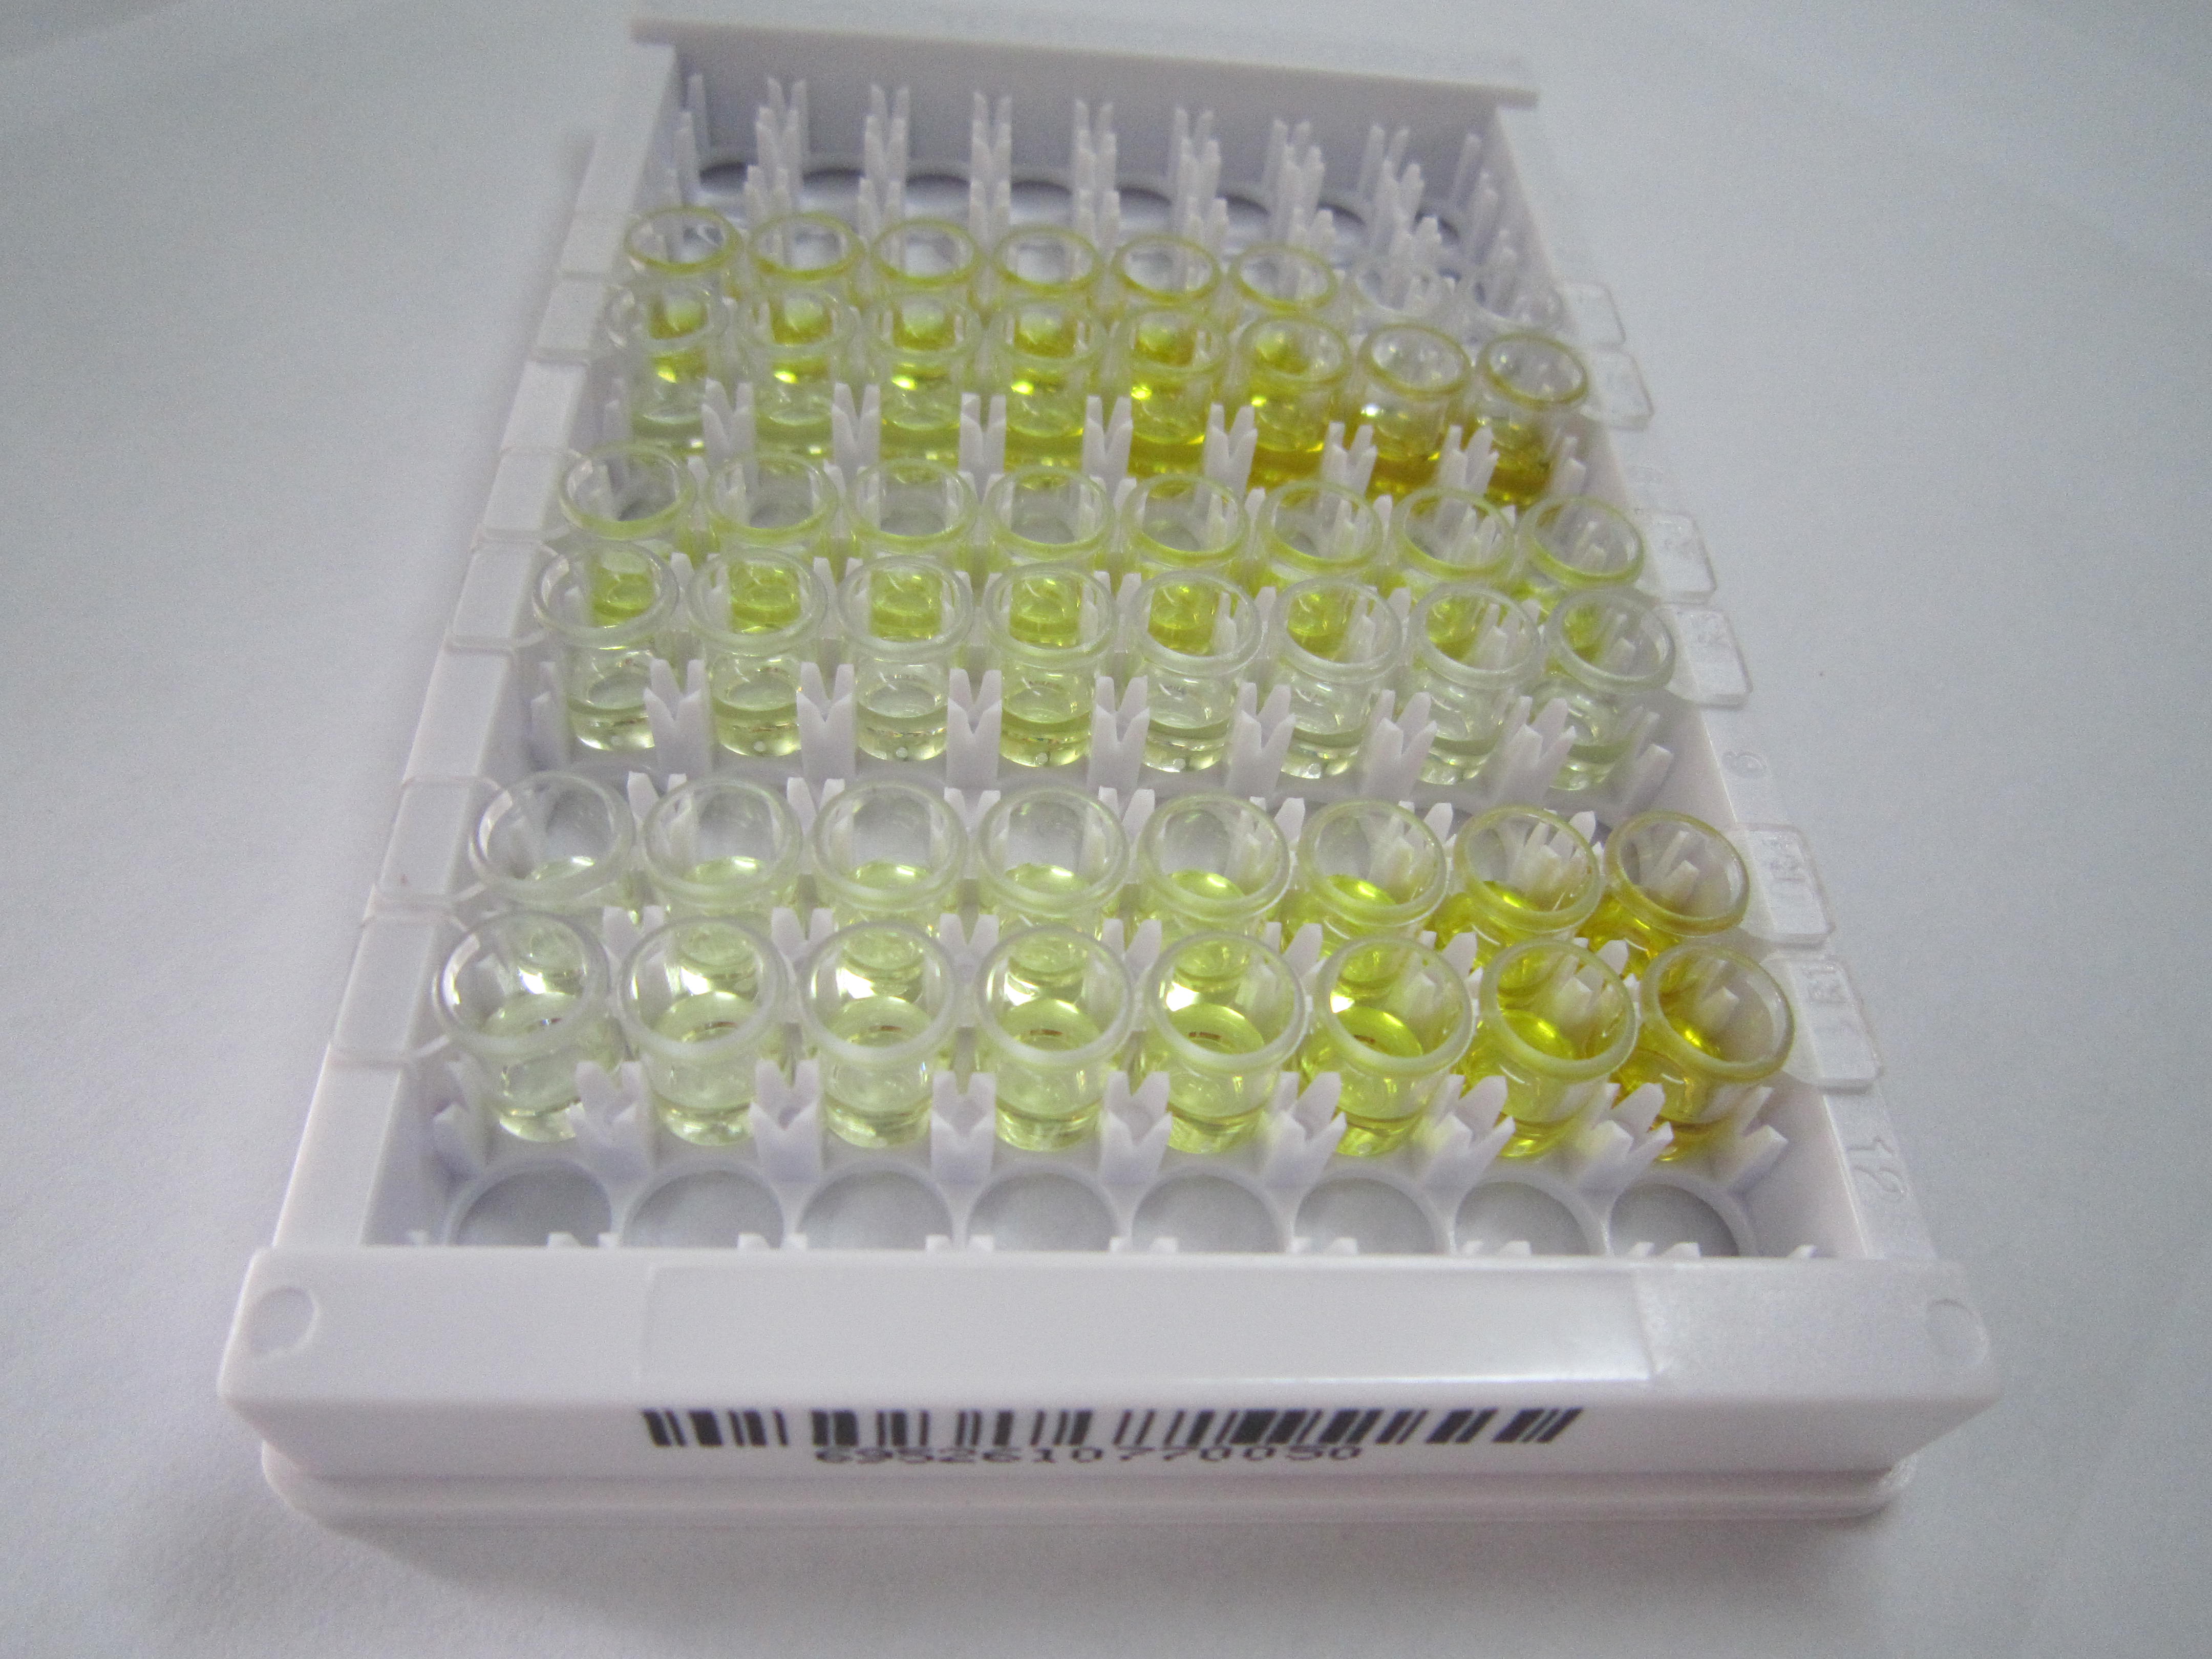 ELISA Kit for Angiopoietin Like Protein 8 (ANGPTL8)